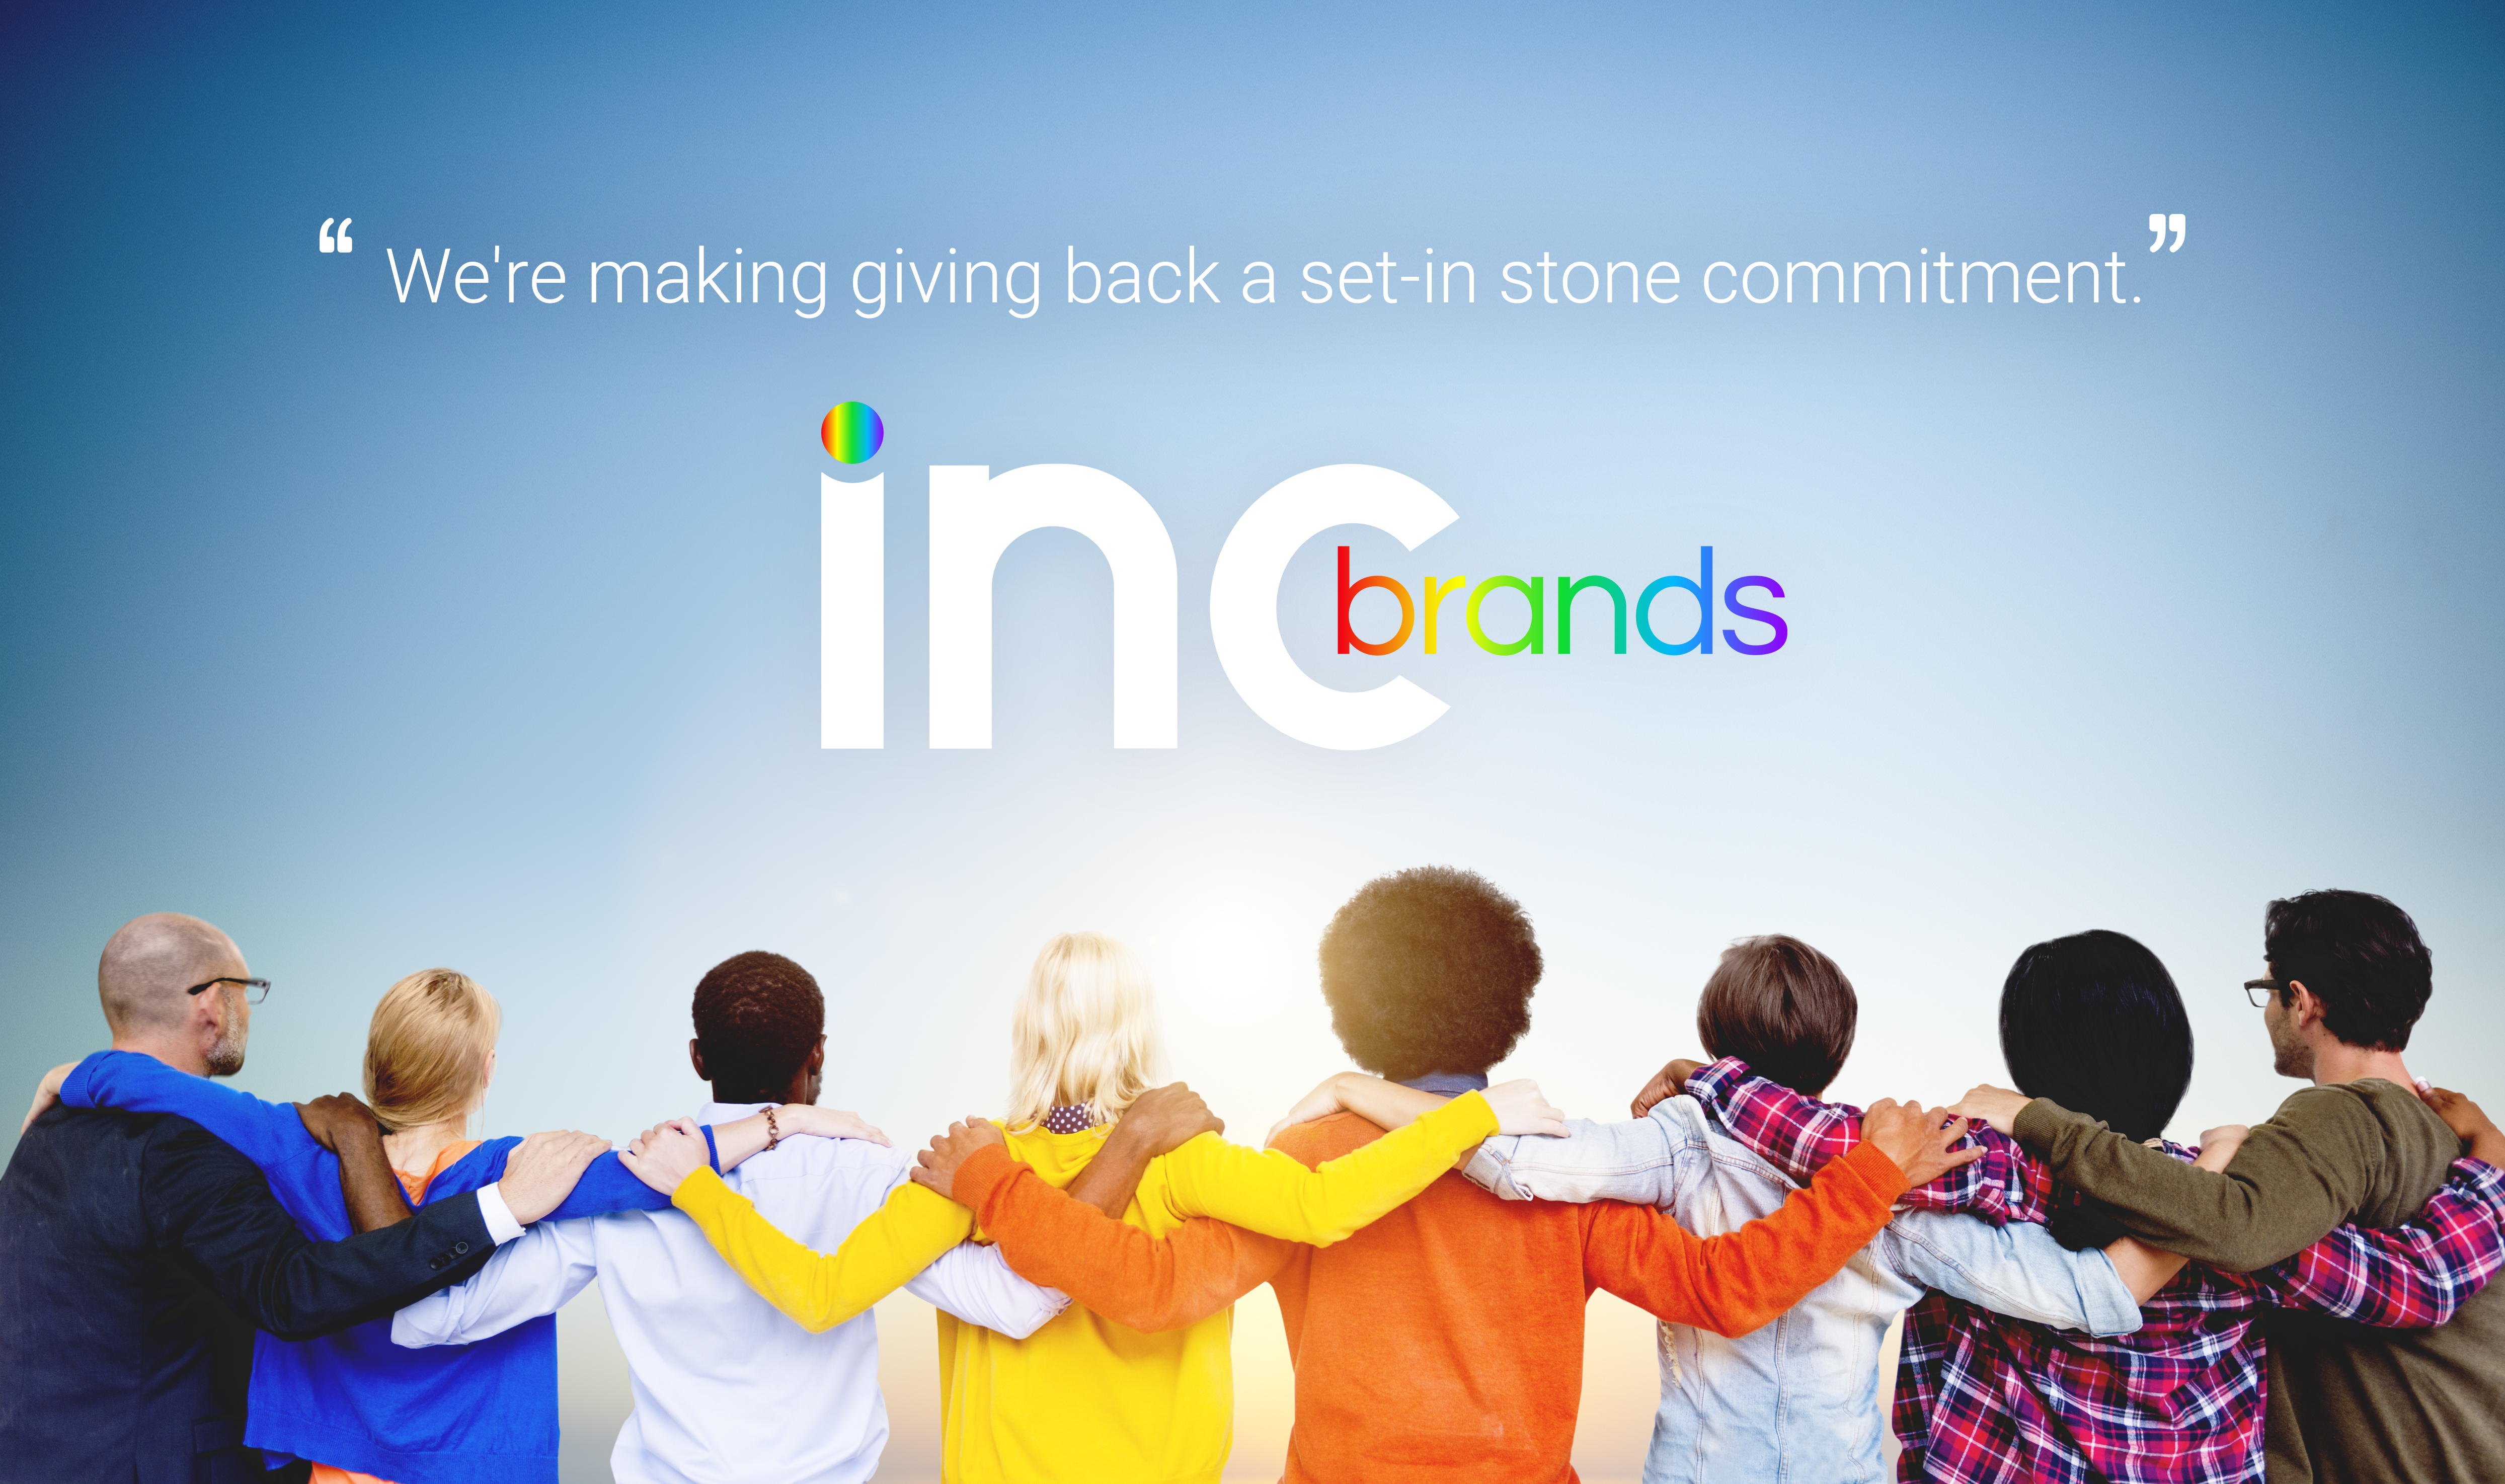 We're making giving back a set-in stone commitment.